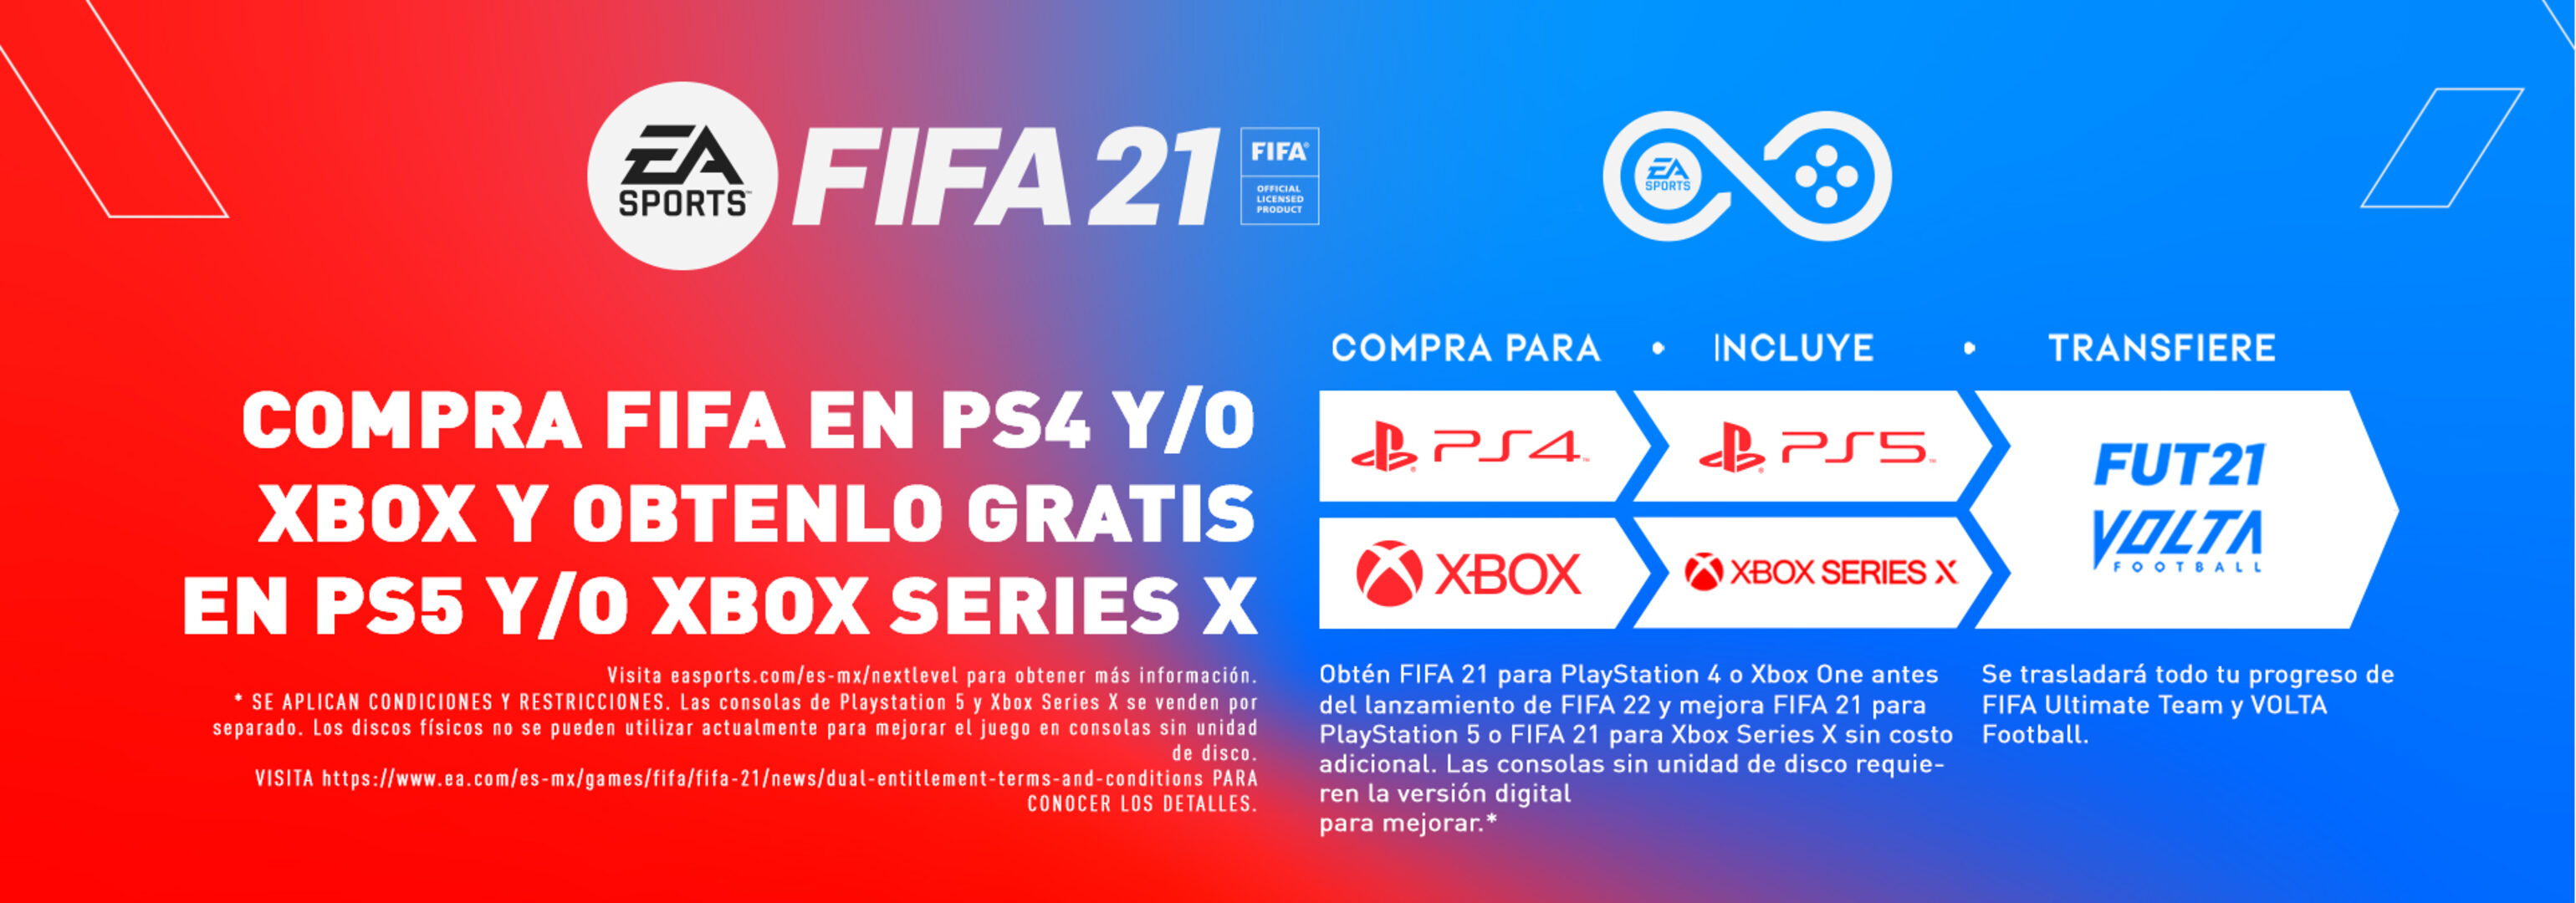 FIFA 21 (Spain/Portugal), PS4/PS5